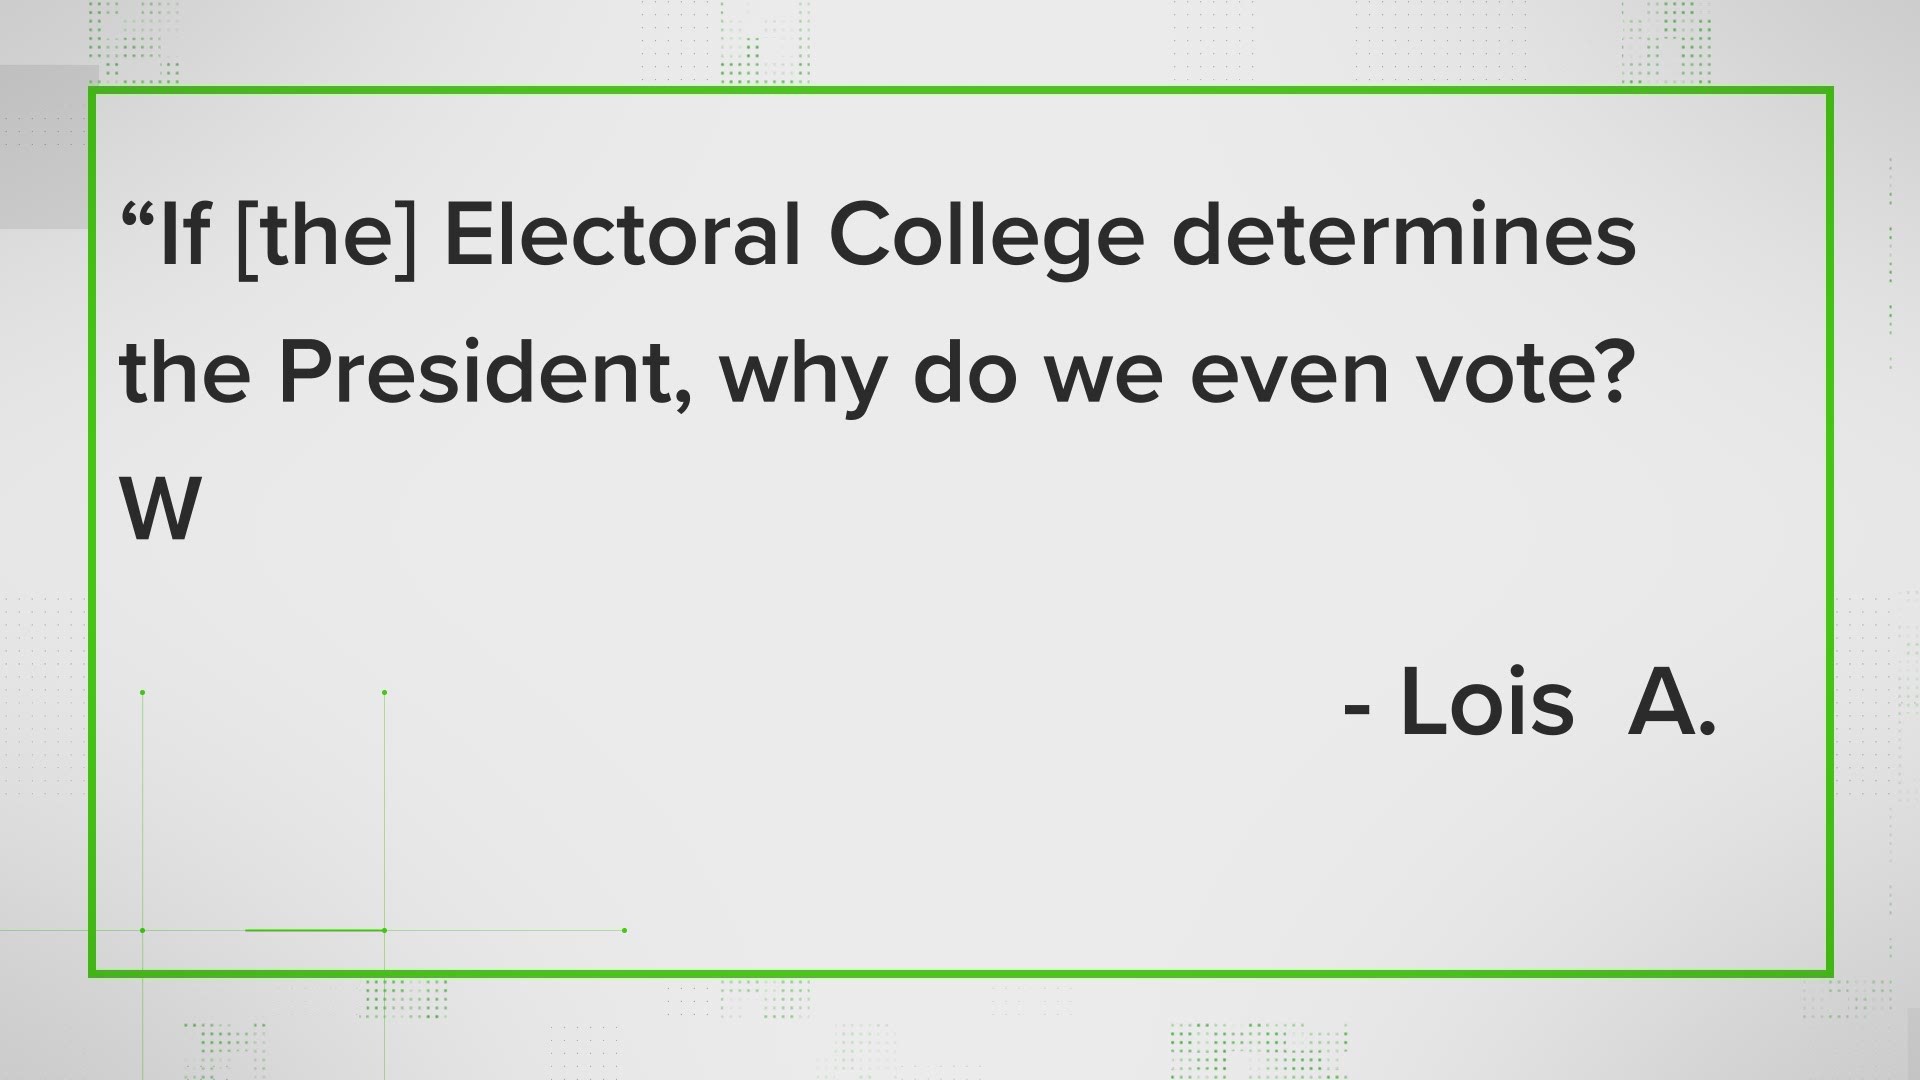 Lois A. asked: "Why do we still have people vote if the Electoral College" has such a powerful role in the presidential election?